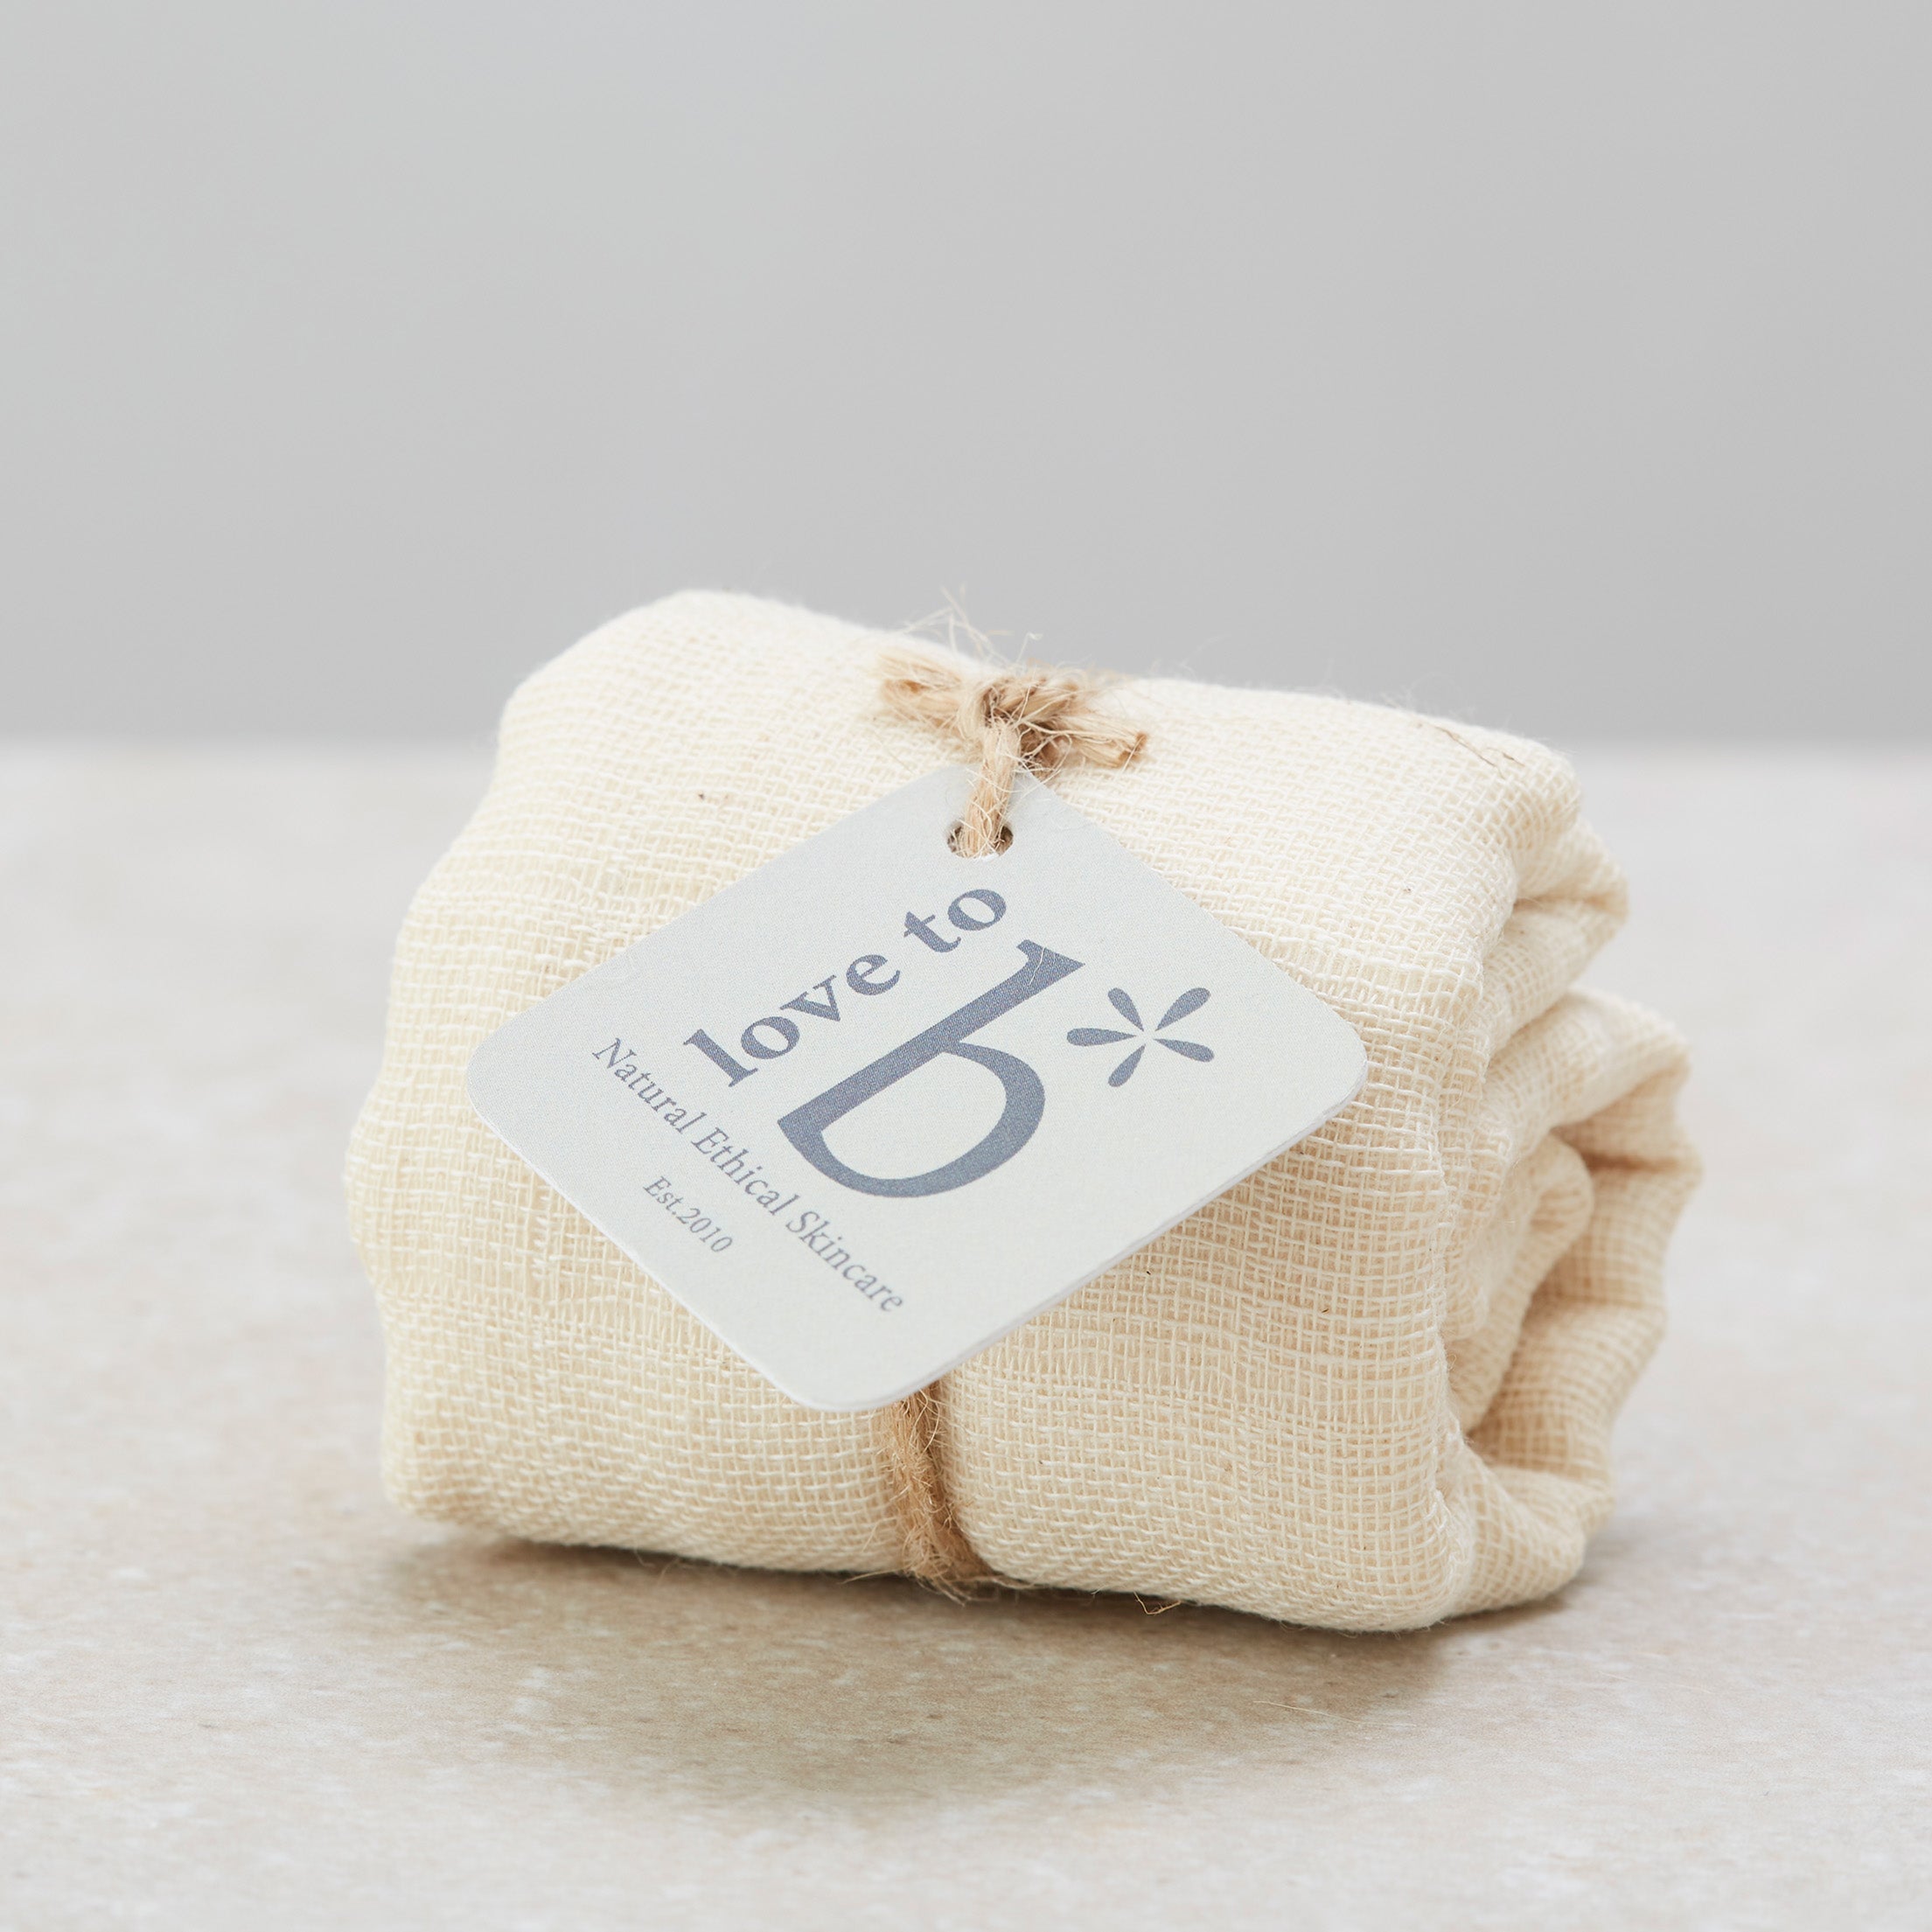 Love to b Skincare Bamboo Cleansing Cloth from our Facial Skincare Gift Set